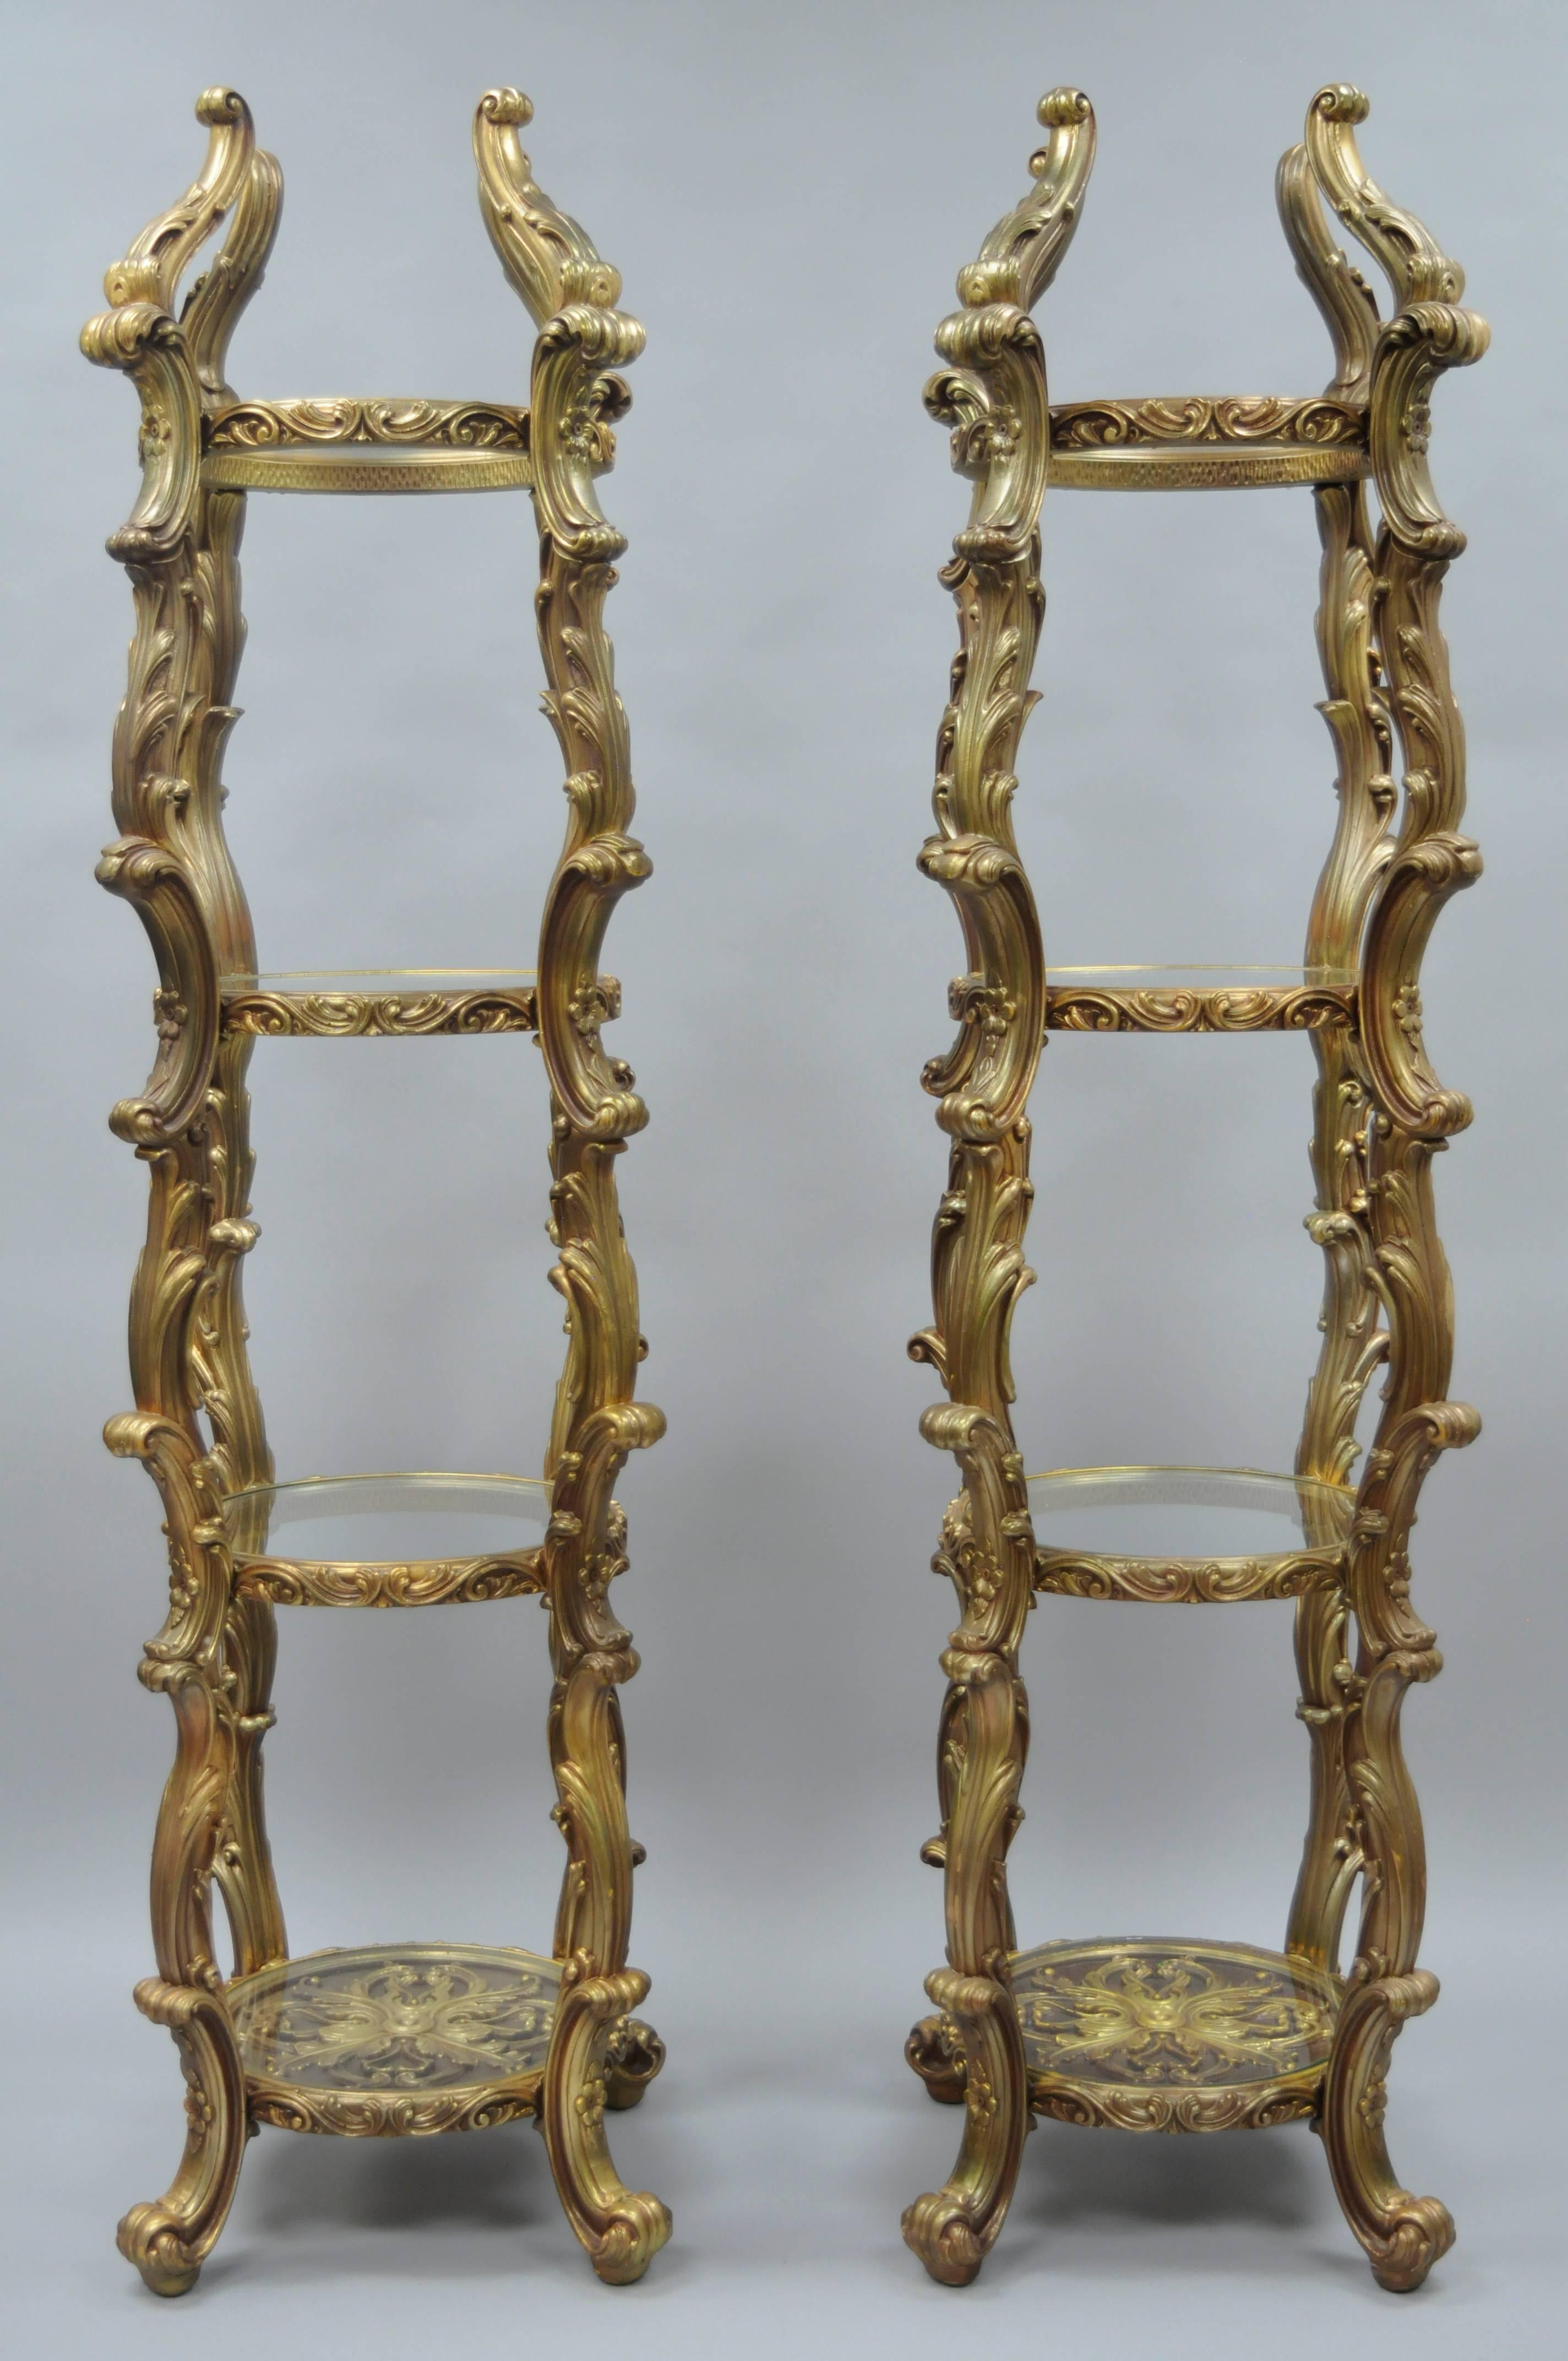 Pair of vintage gold Hollywood Regency Syroco etagere curios. The pair features nice round narrow forms, fancy acanthus leaf design molded frames, four round glass shelves with the lowest shelf having ornate detailing under the glass and an